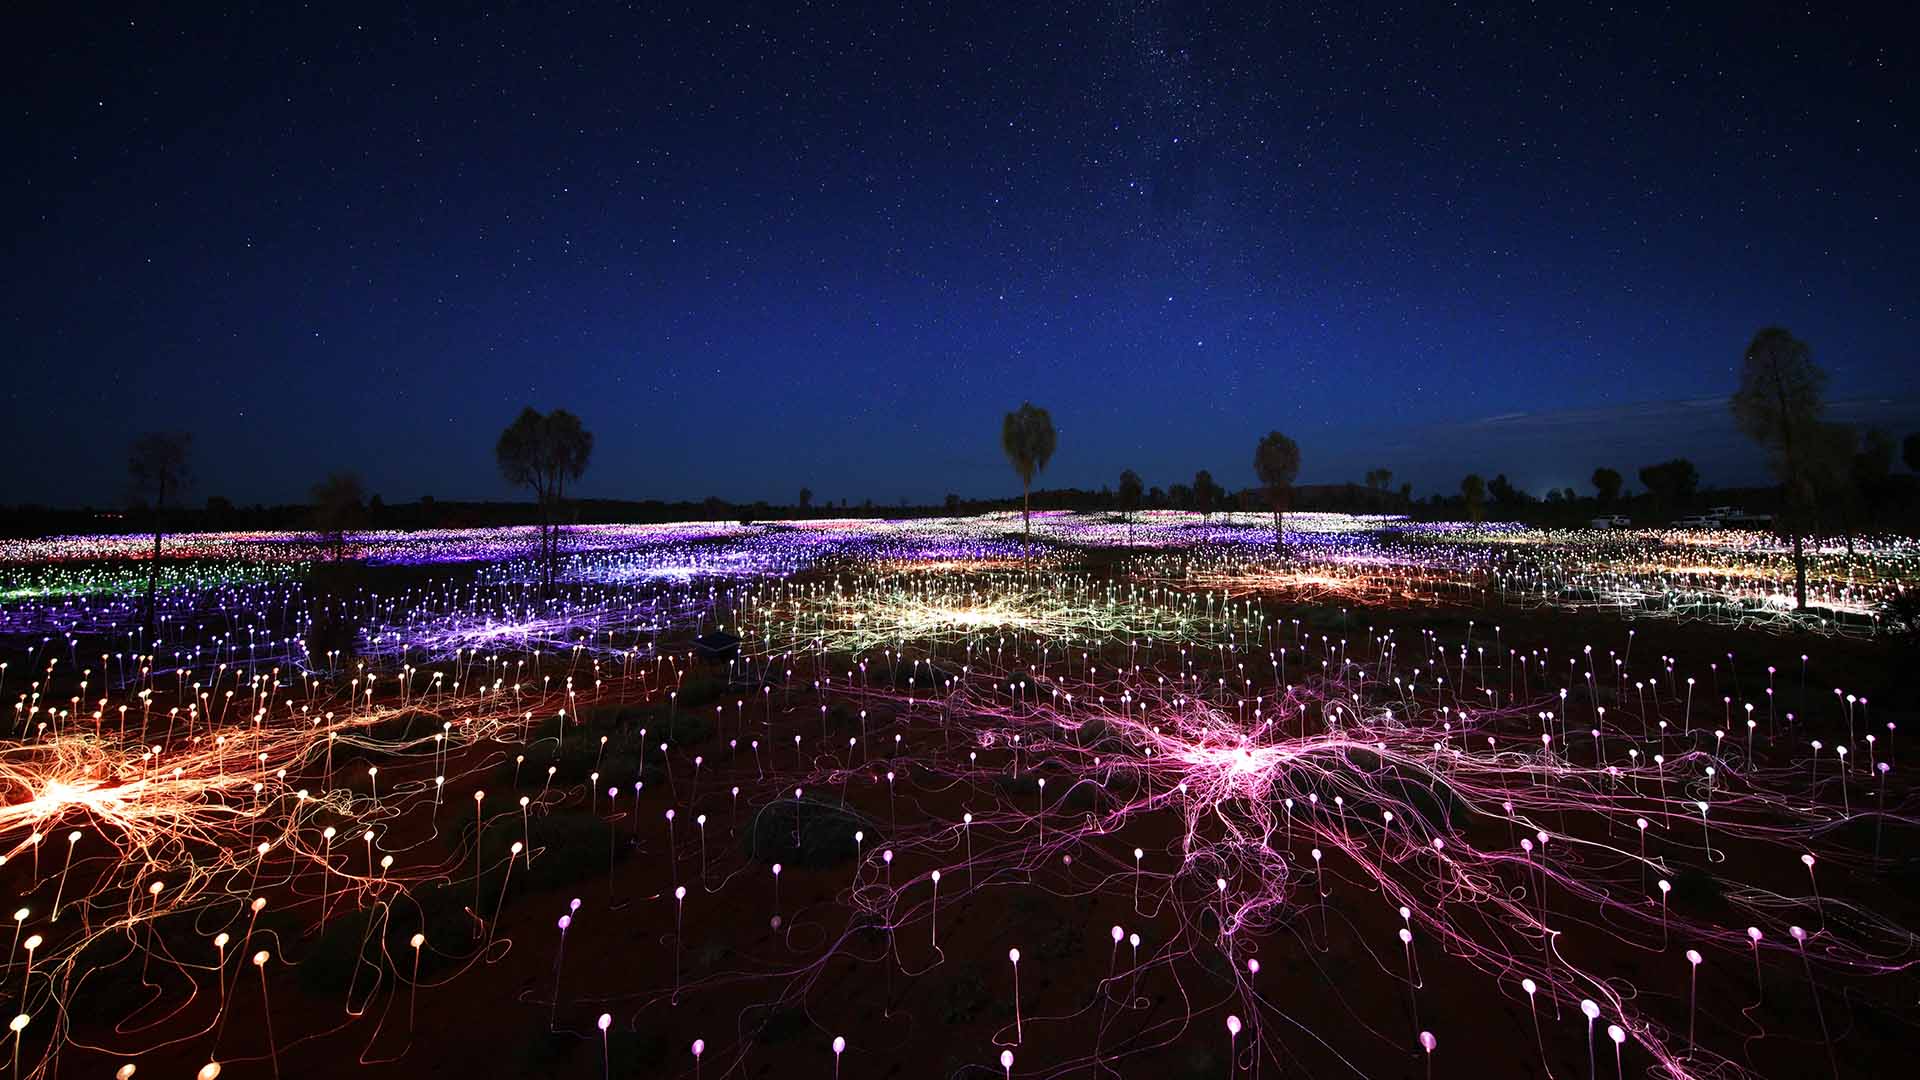 Uluru's Incredible 'Field of Light' Installation Has Been Extended Indefinitely